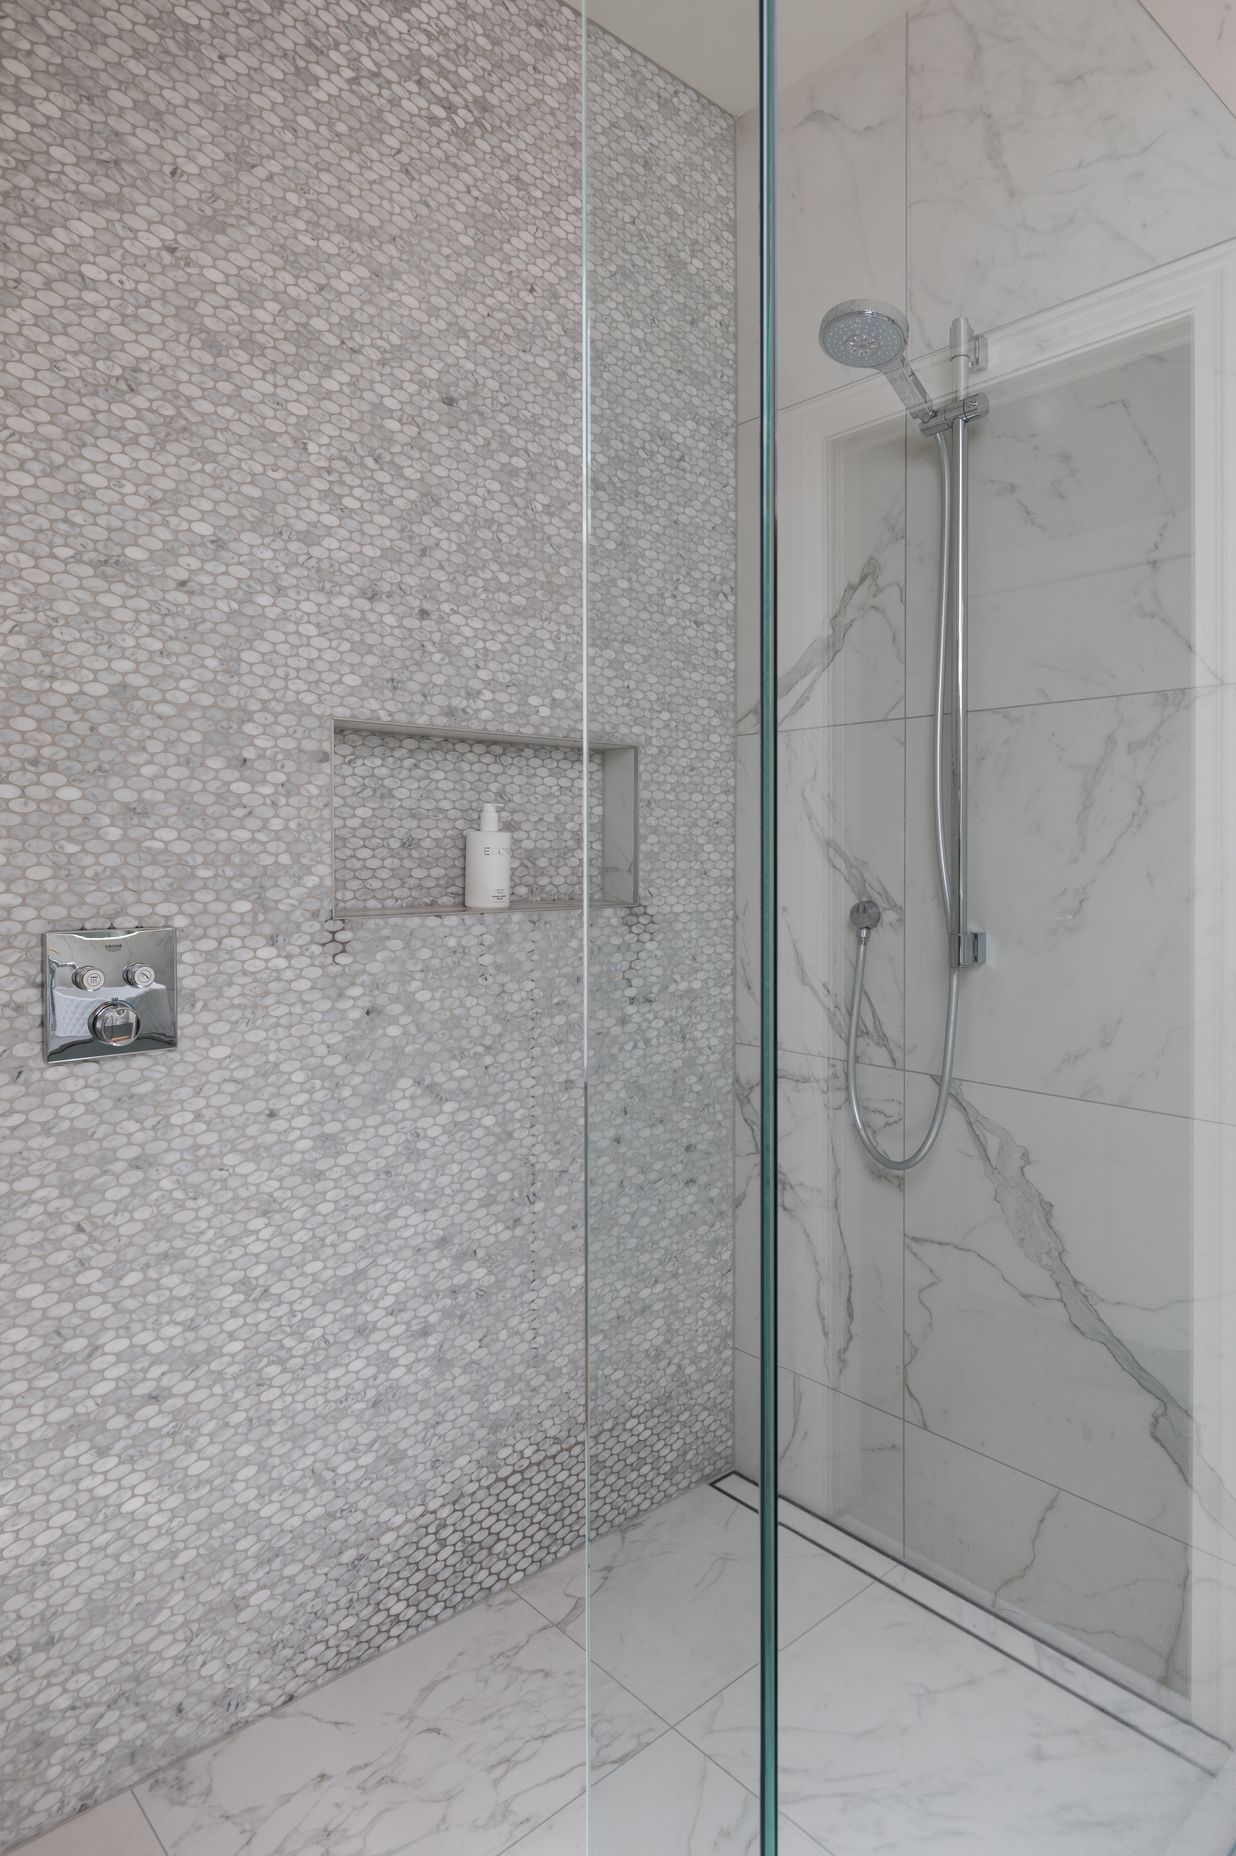 Ensuite Bathroom - walk in shower with tiled channel drain detail